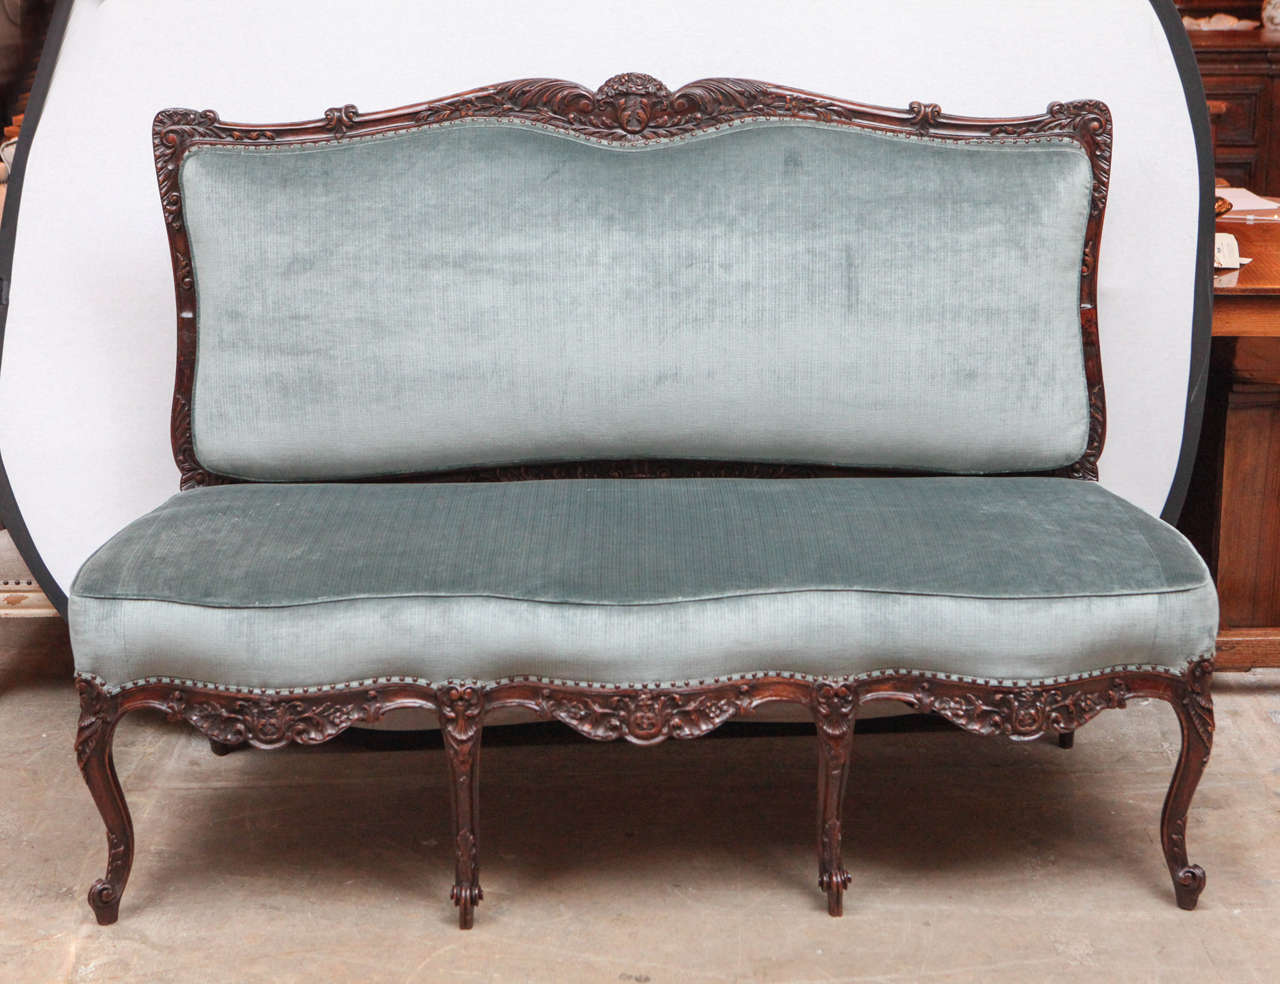 19th century French beautifully carved walnut armless settee with flower basket motif. The settee has been newly upholstered in velvet with nailhead detailing.